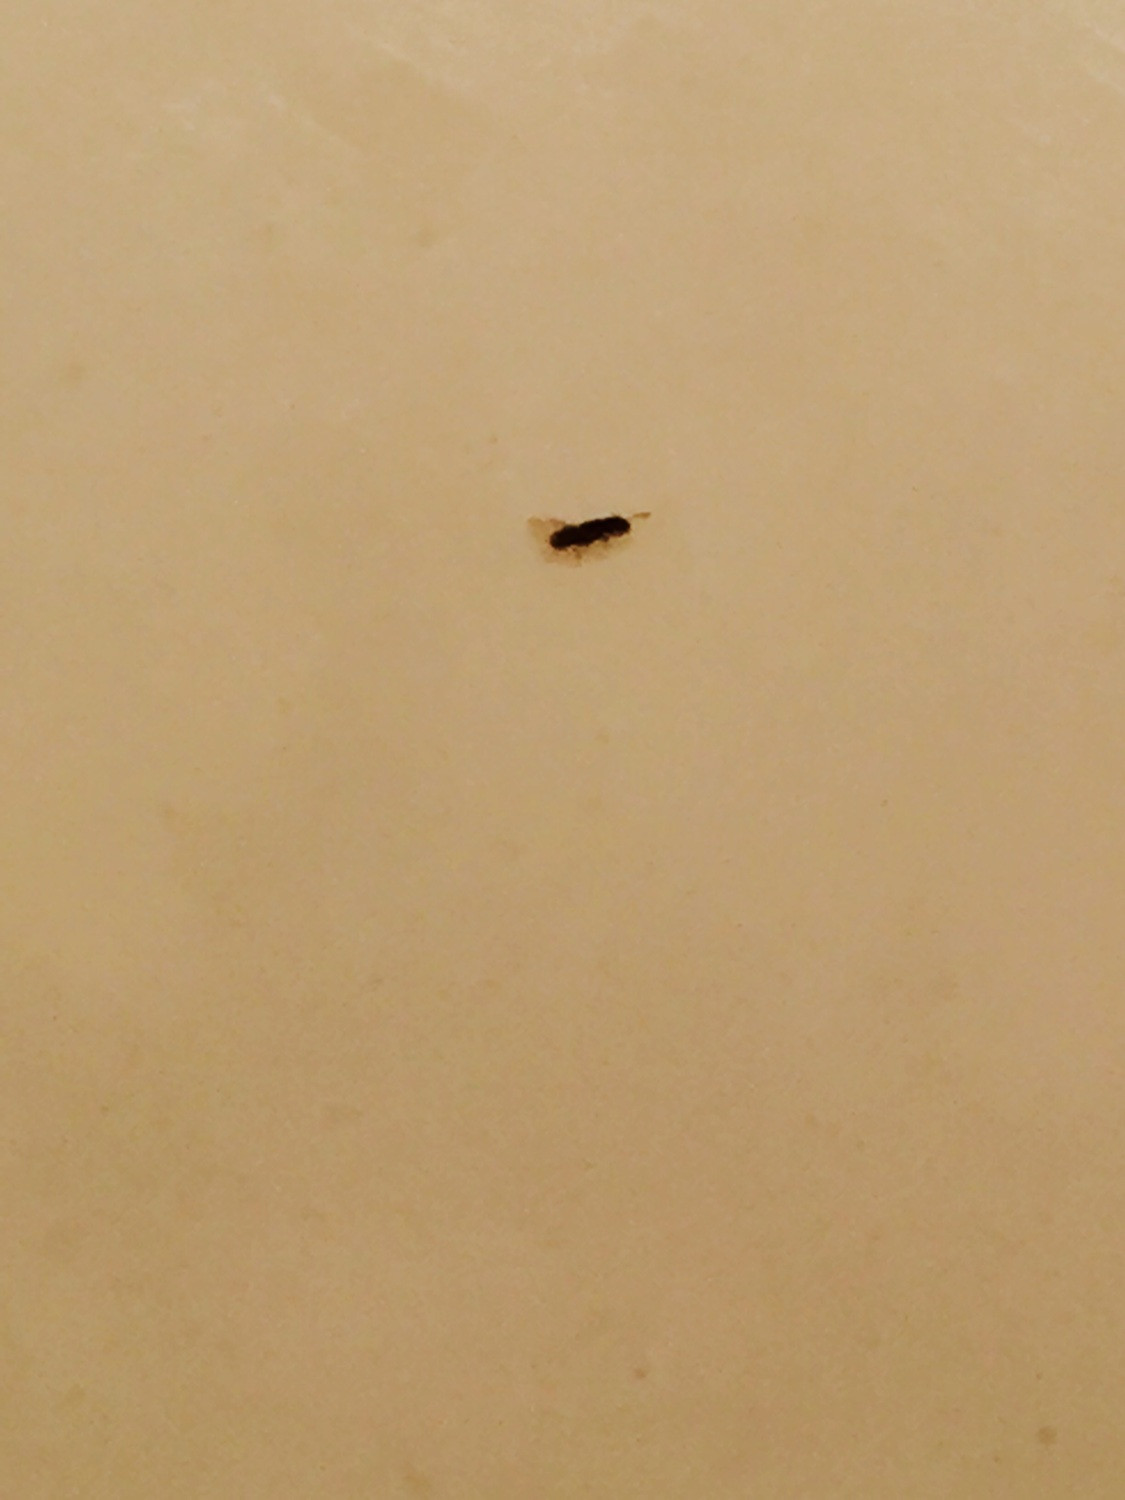 Small Black Flies In Bathroom
 Small black bugs with wings Ask an Expert